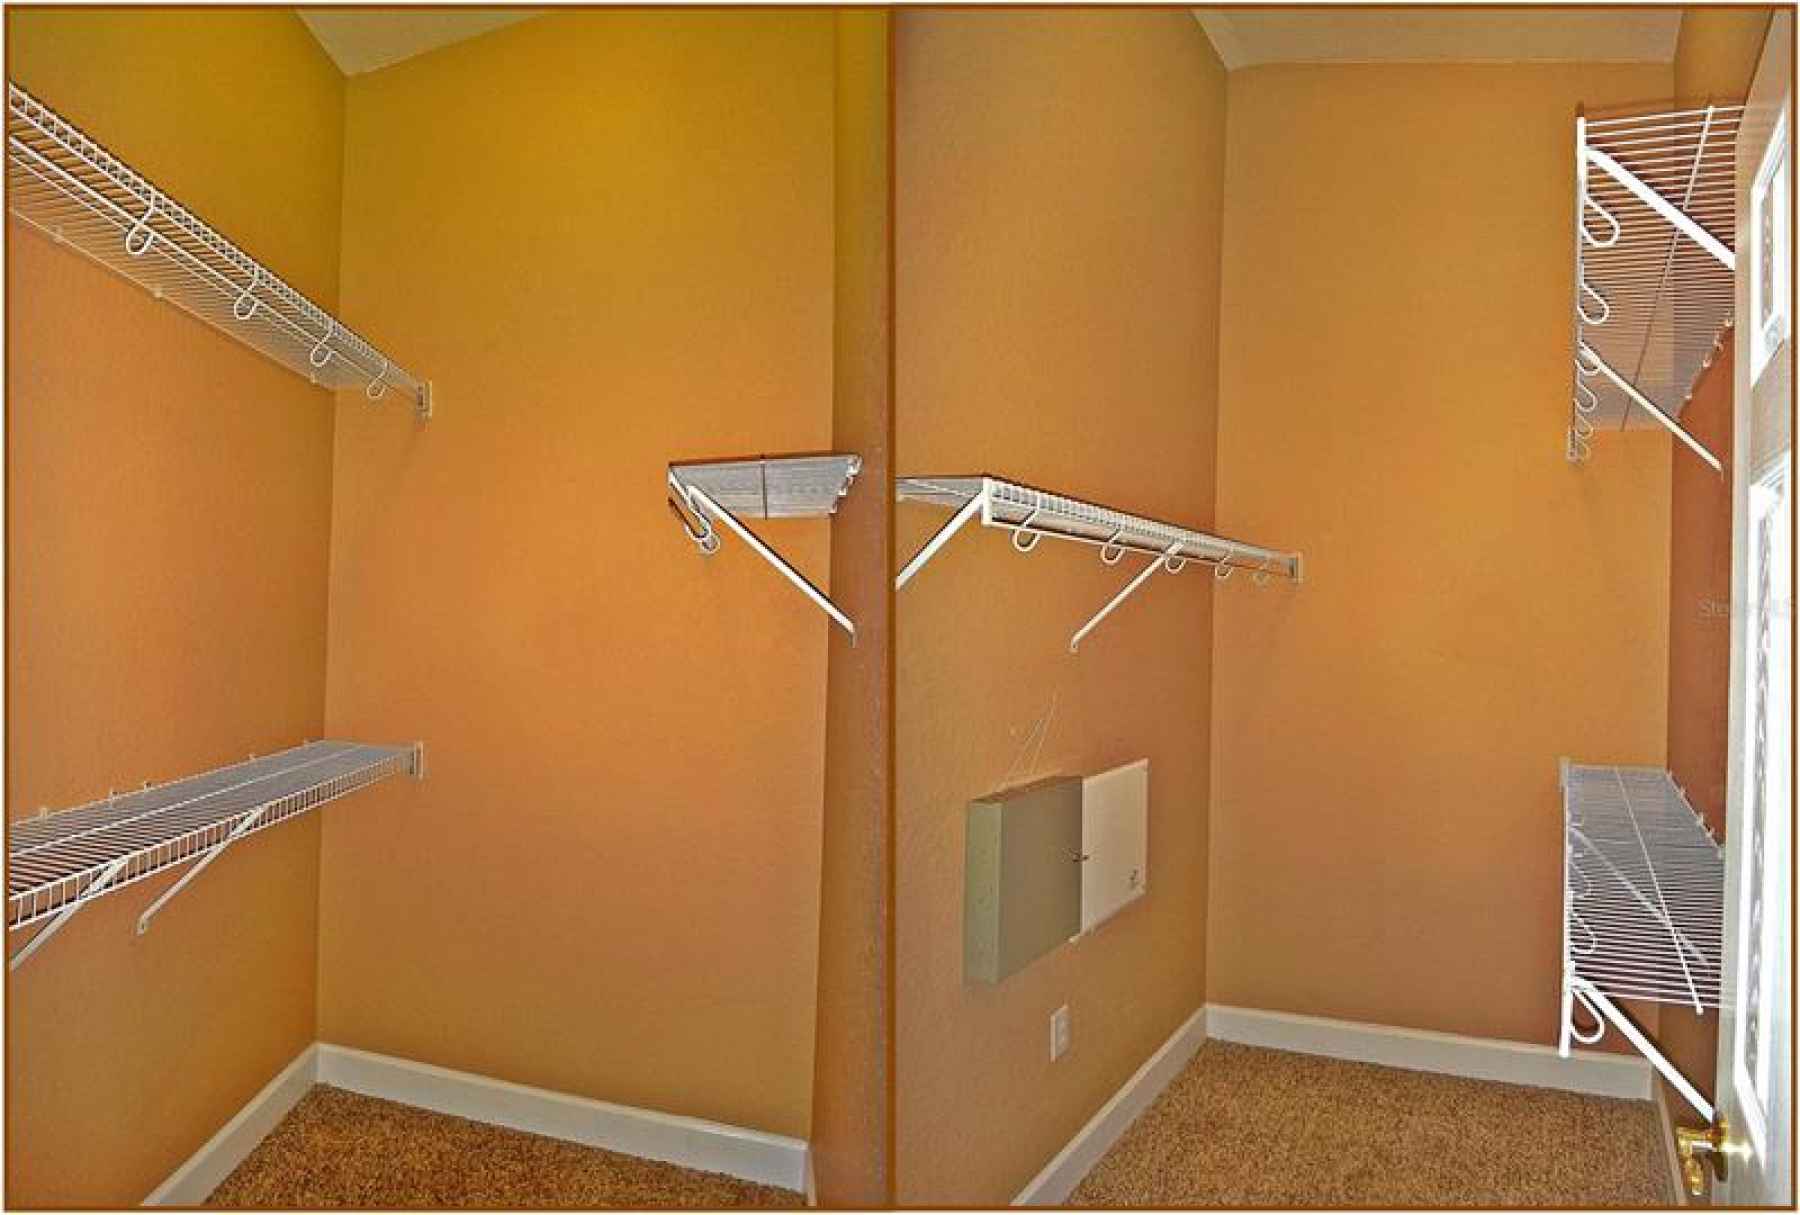 The Master bedroom has his/hers walk-in closets